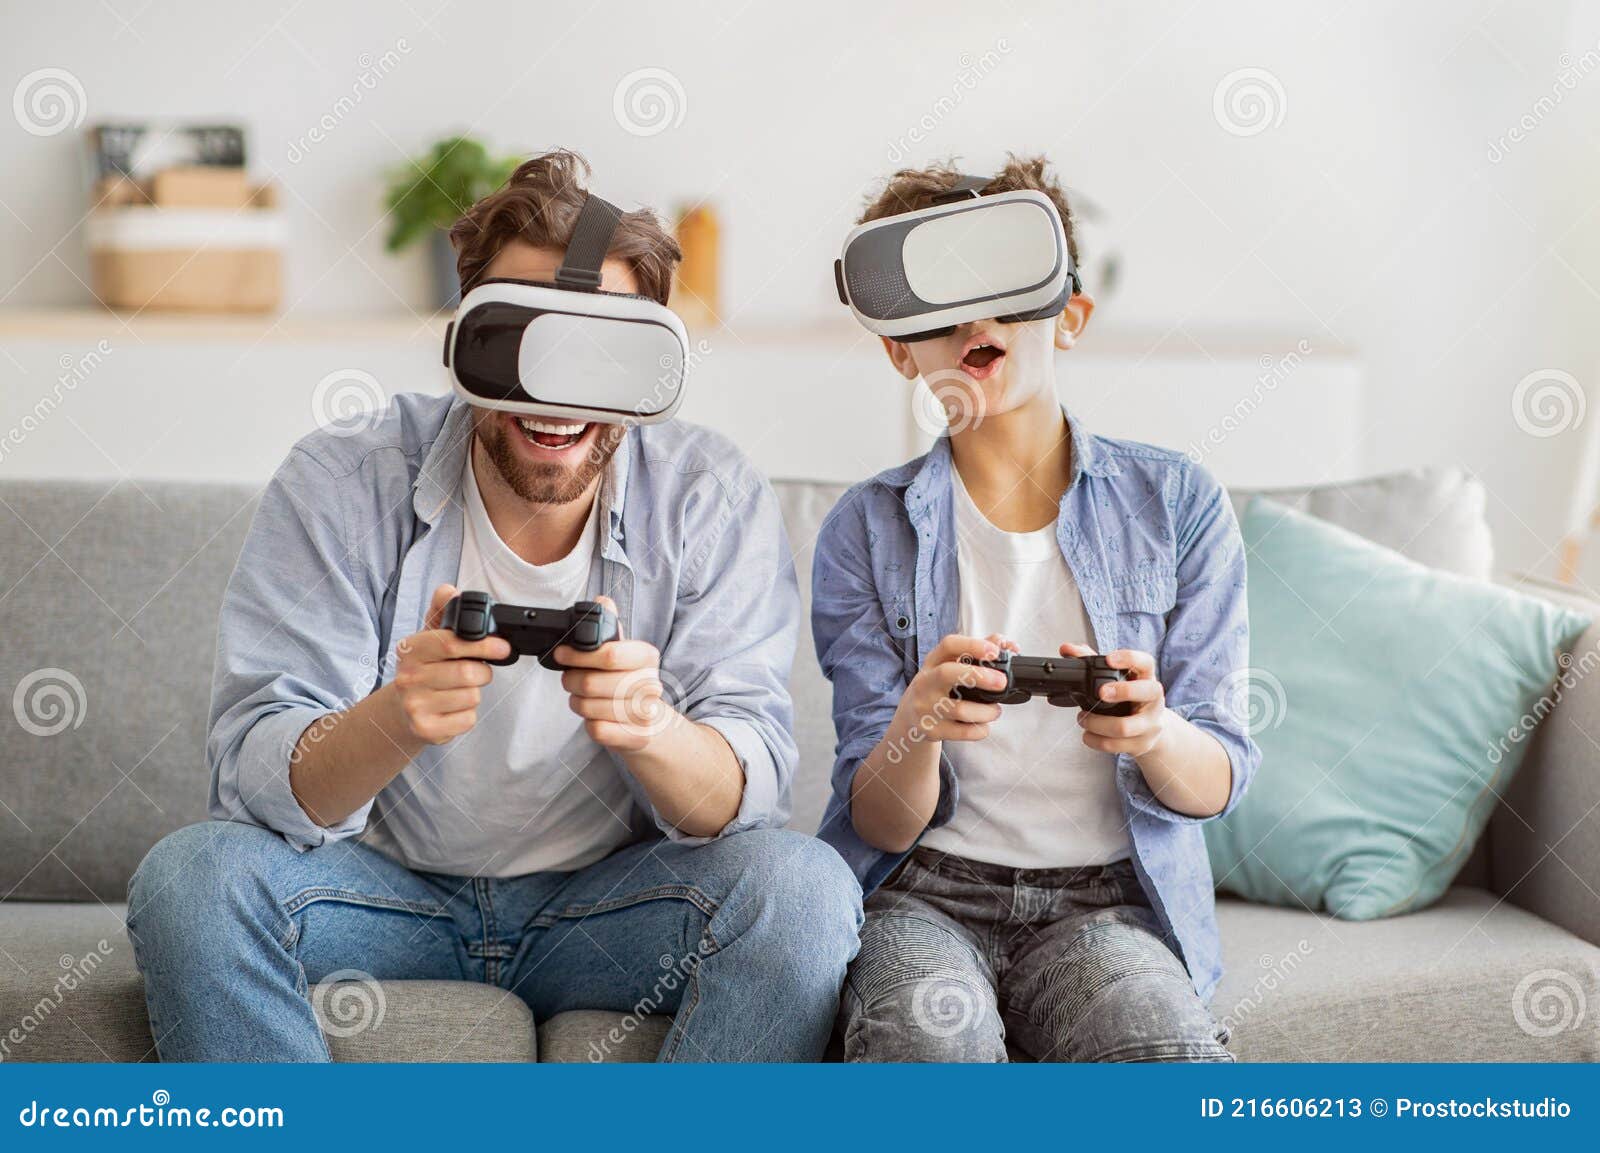 Virtual Reality. Excited Father Teen Son Trying Glasses and Playing Videogames Together Stock Image - Image of electronics, 216606213